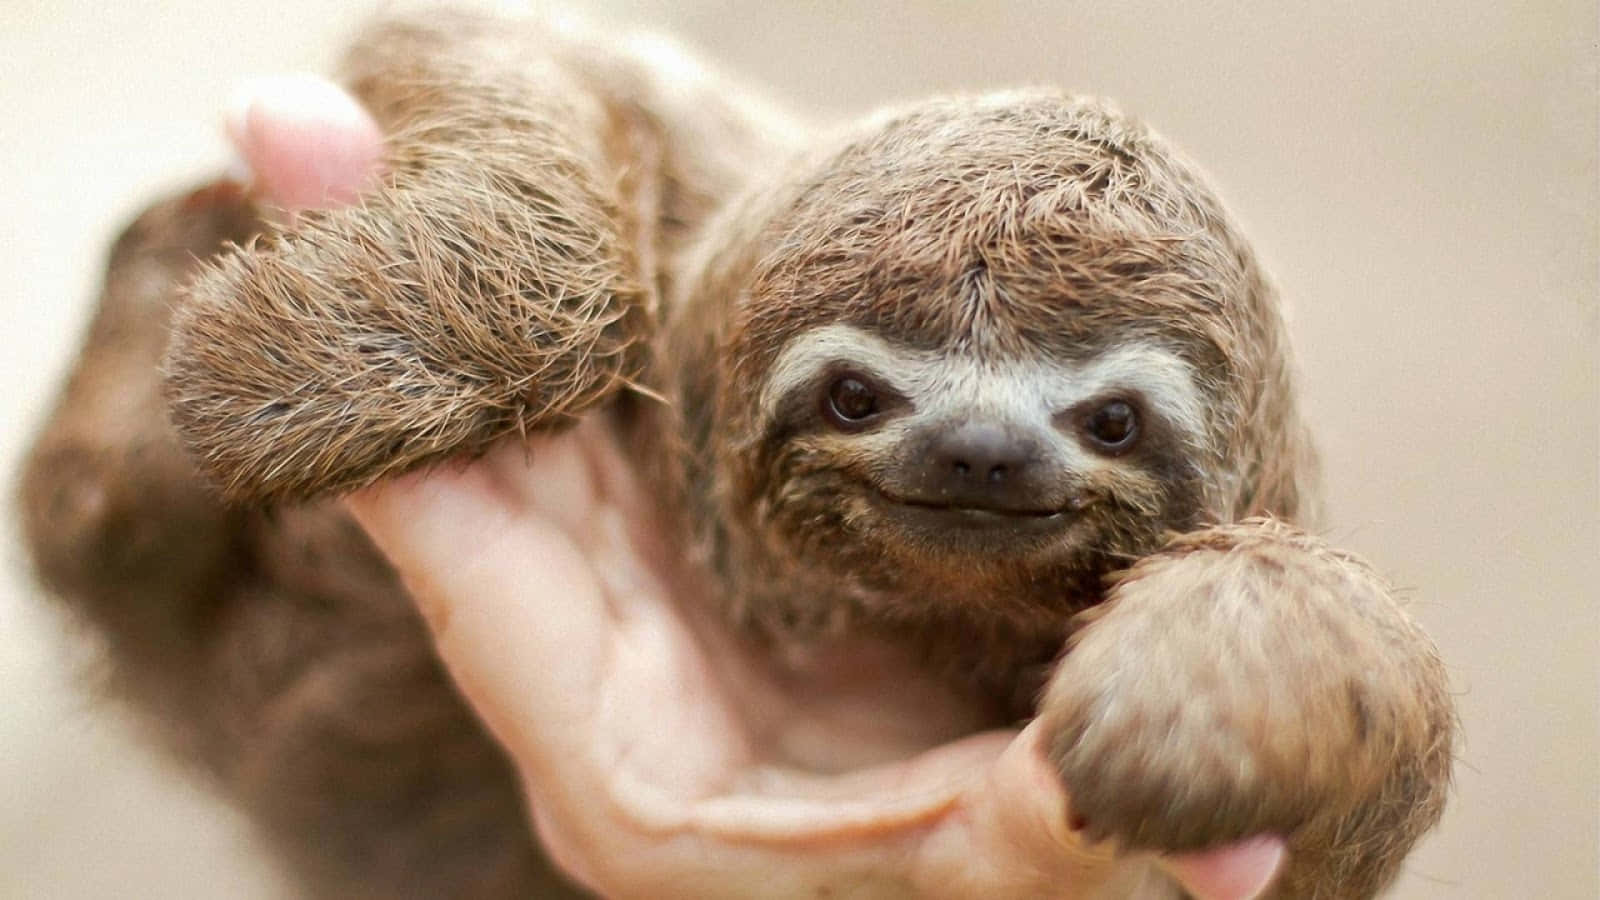 Cute Baby Funny Sloth Picture